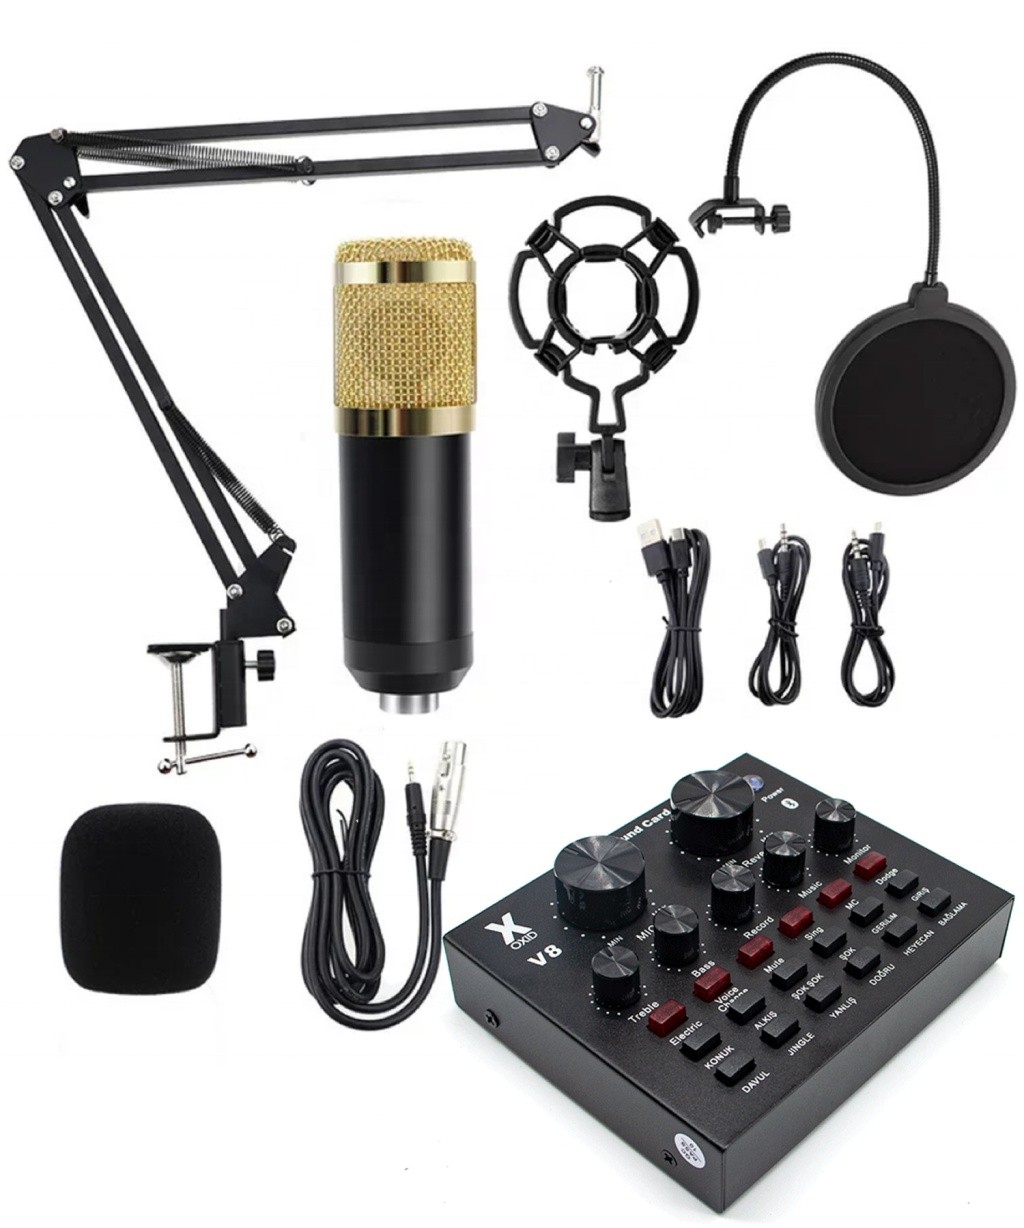 Sound card and microphone set